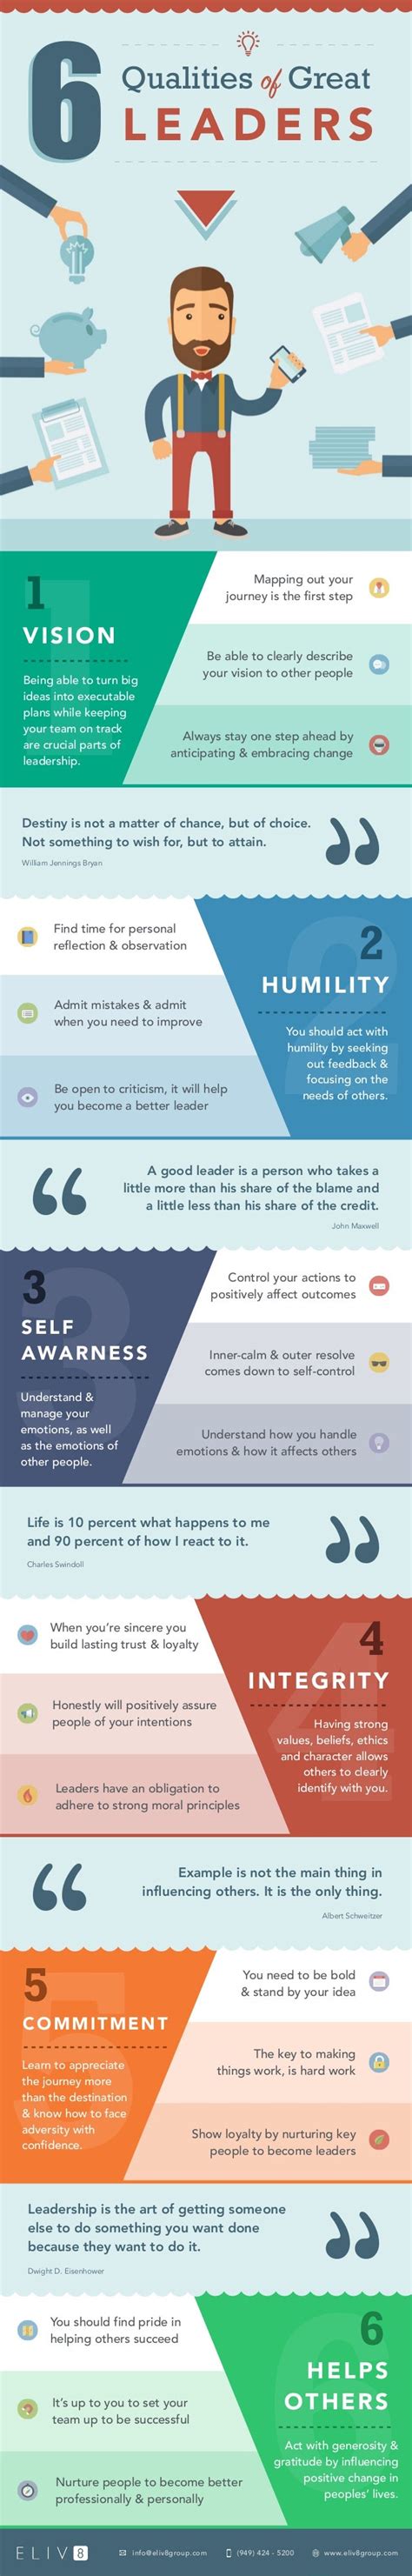 6 qualities of all great leaders [infographic]